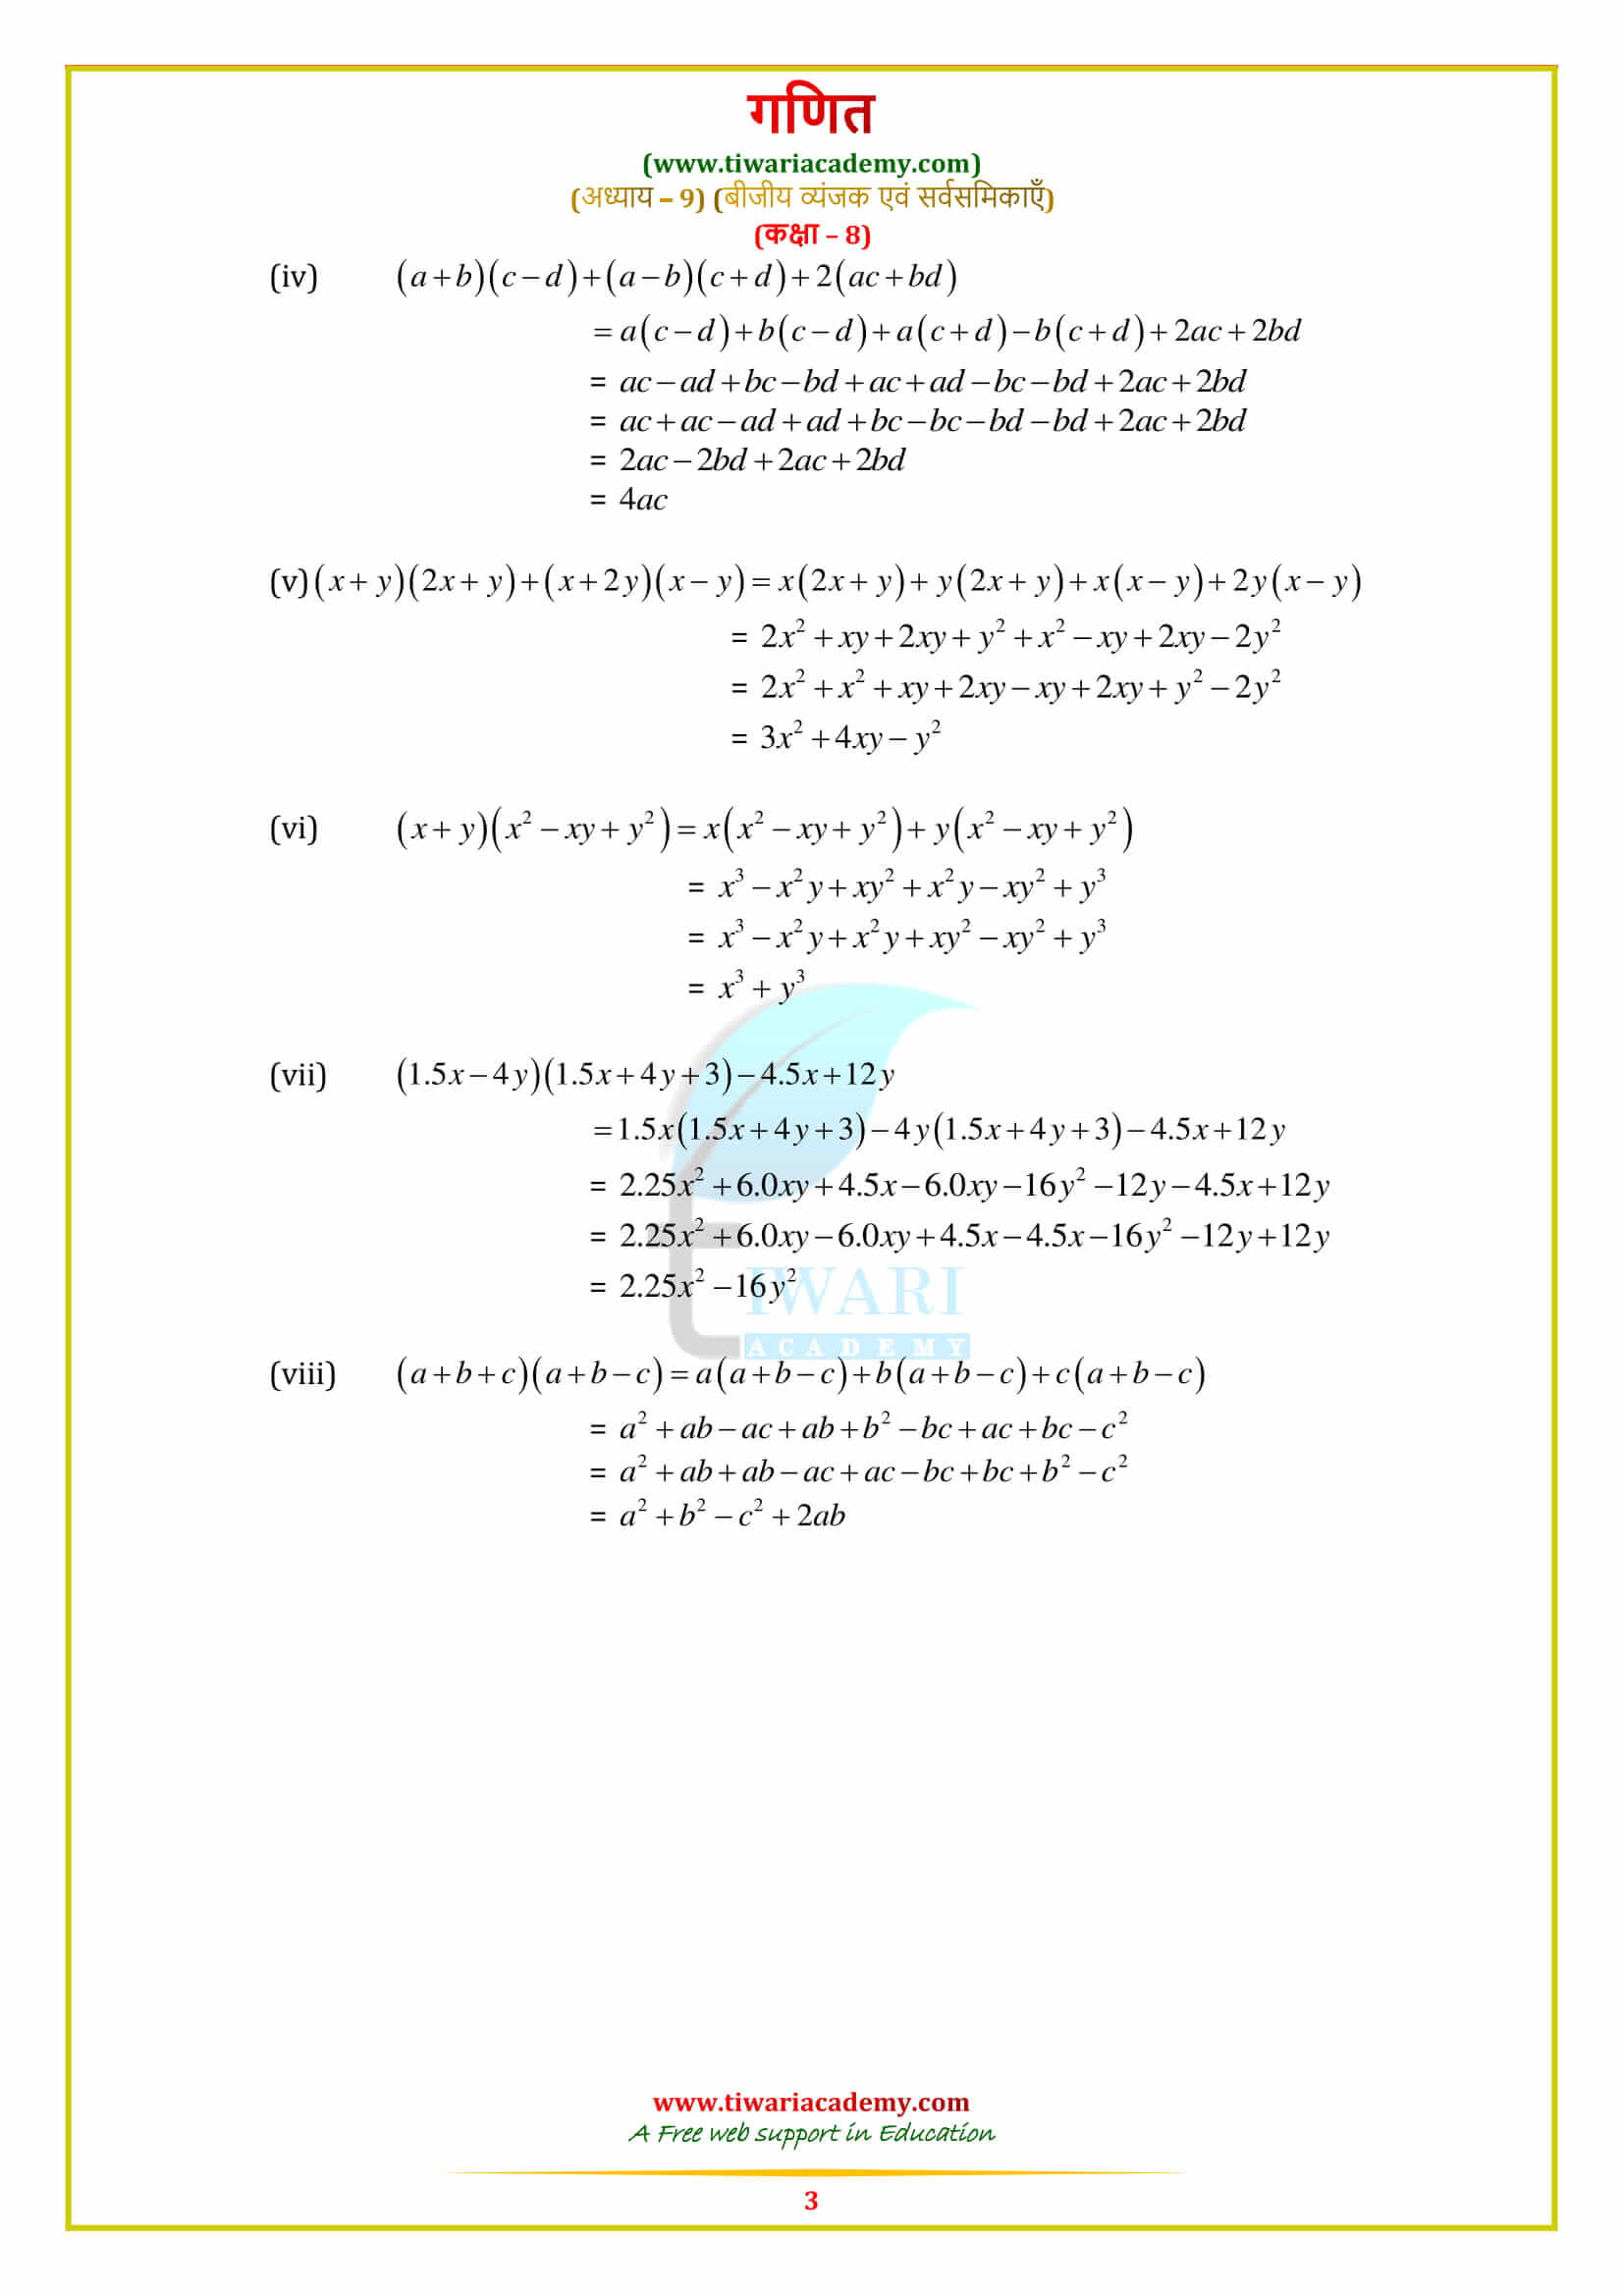 8 Maths Exercise 9.4 Solutions guide in pdf form free